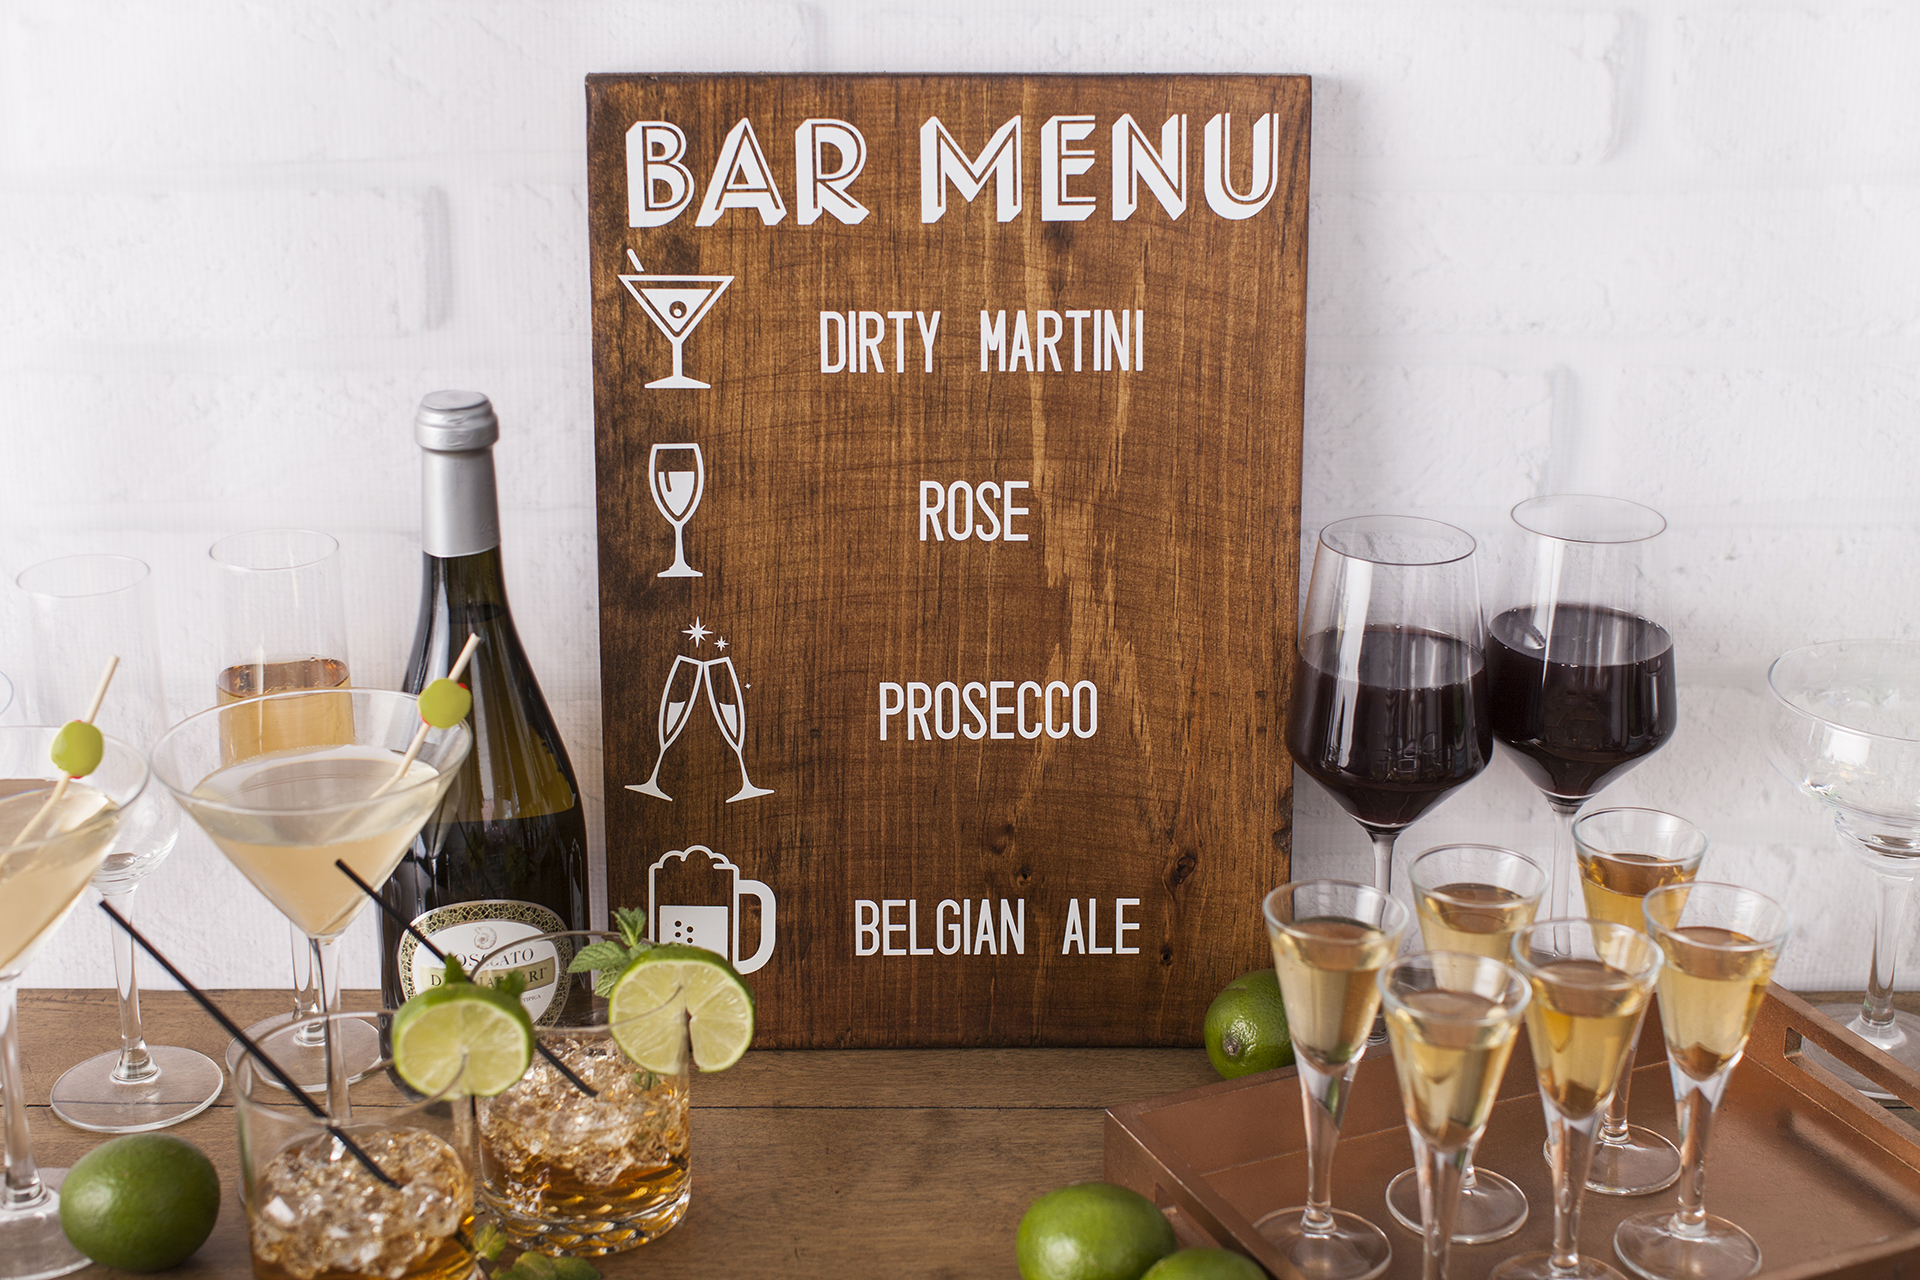 Bar menu on wood with icons next to each drink name